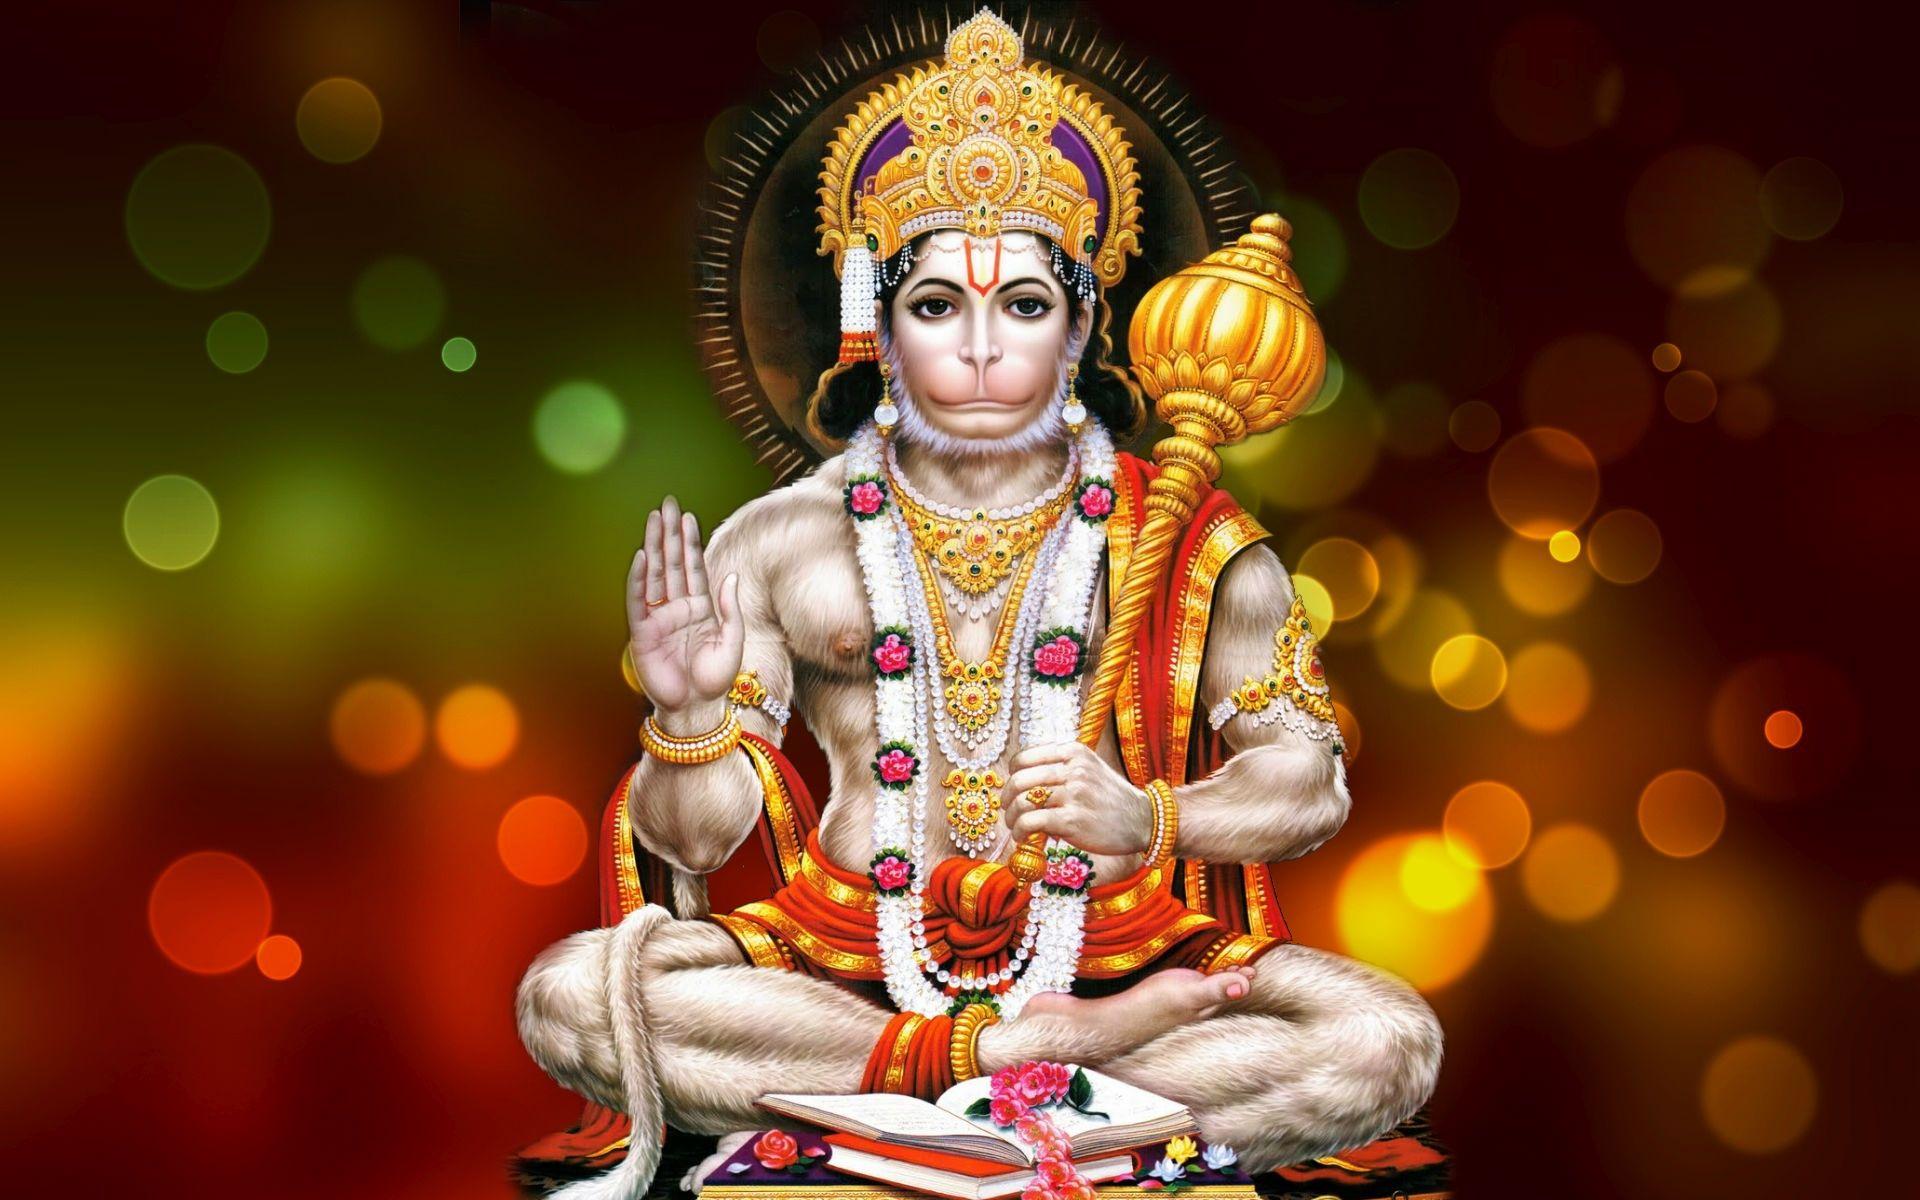 Hanuman Jayanti 2018: Wishes, quotes, and image to share on SMS